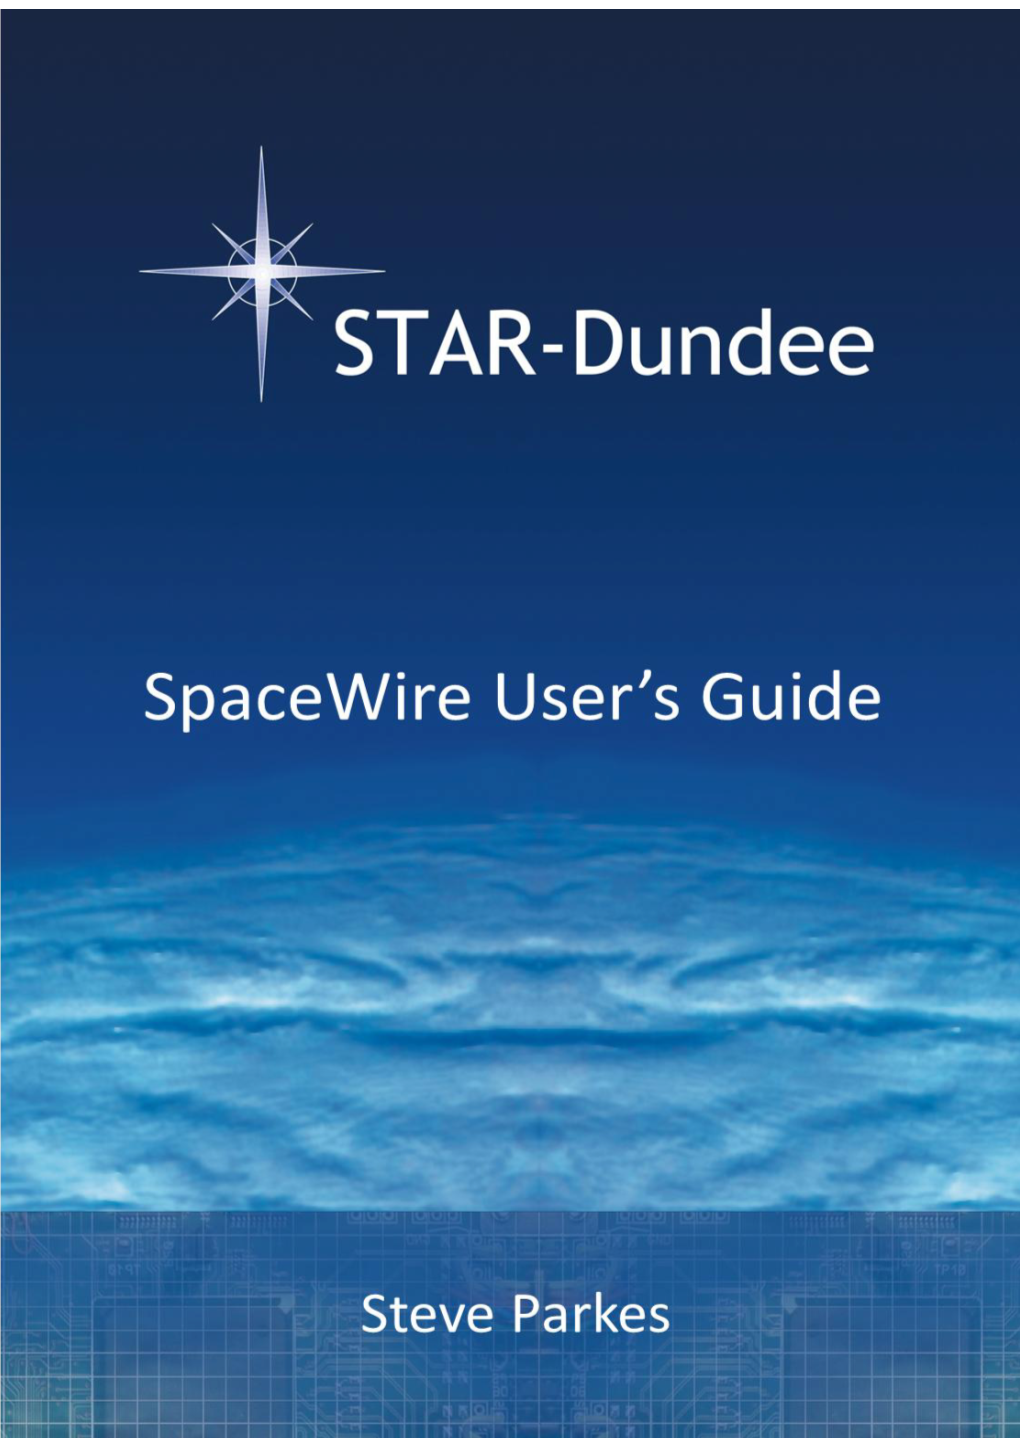 Spacewire User's Guide Is Compiled from Several Papers Written by Steve Parkes, the CEO of STAR-Dundee and Author of This Guide